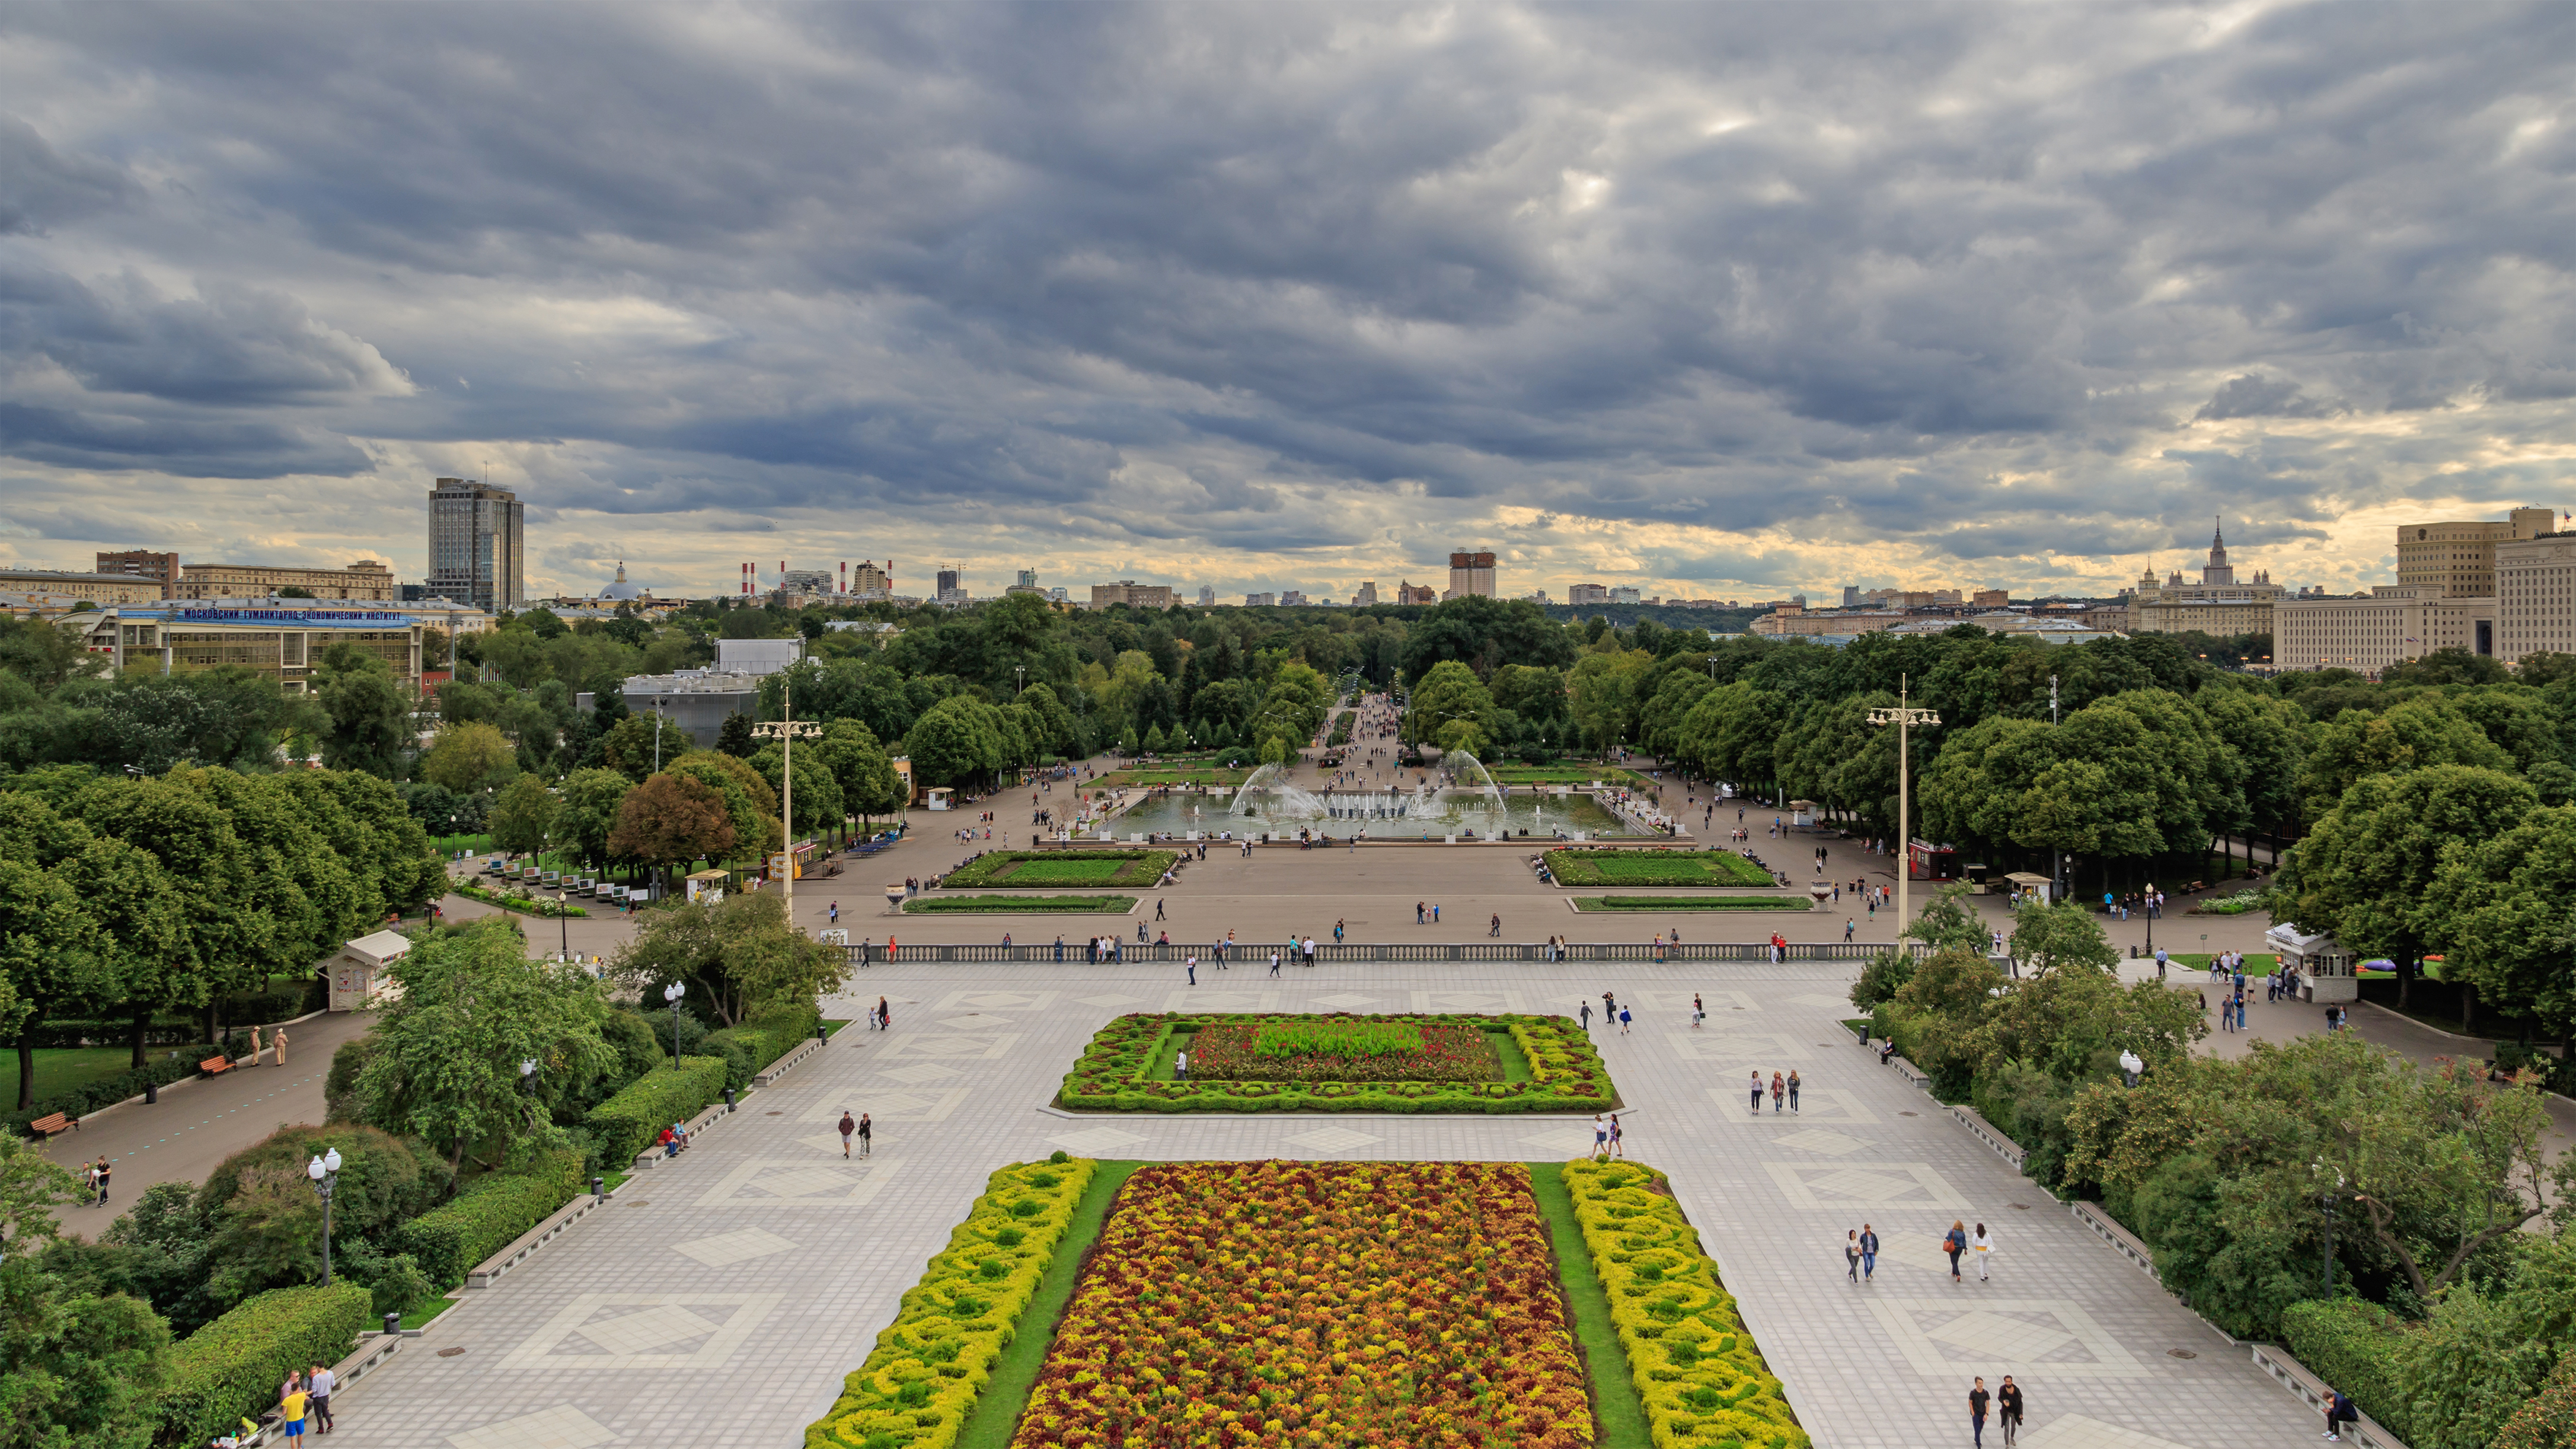 Moscow Gorky Park colonnades viewpoint 08-2016 img1